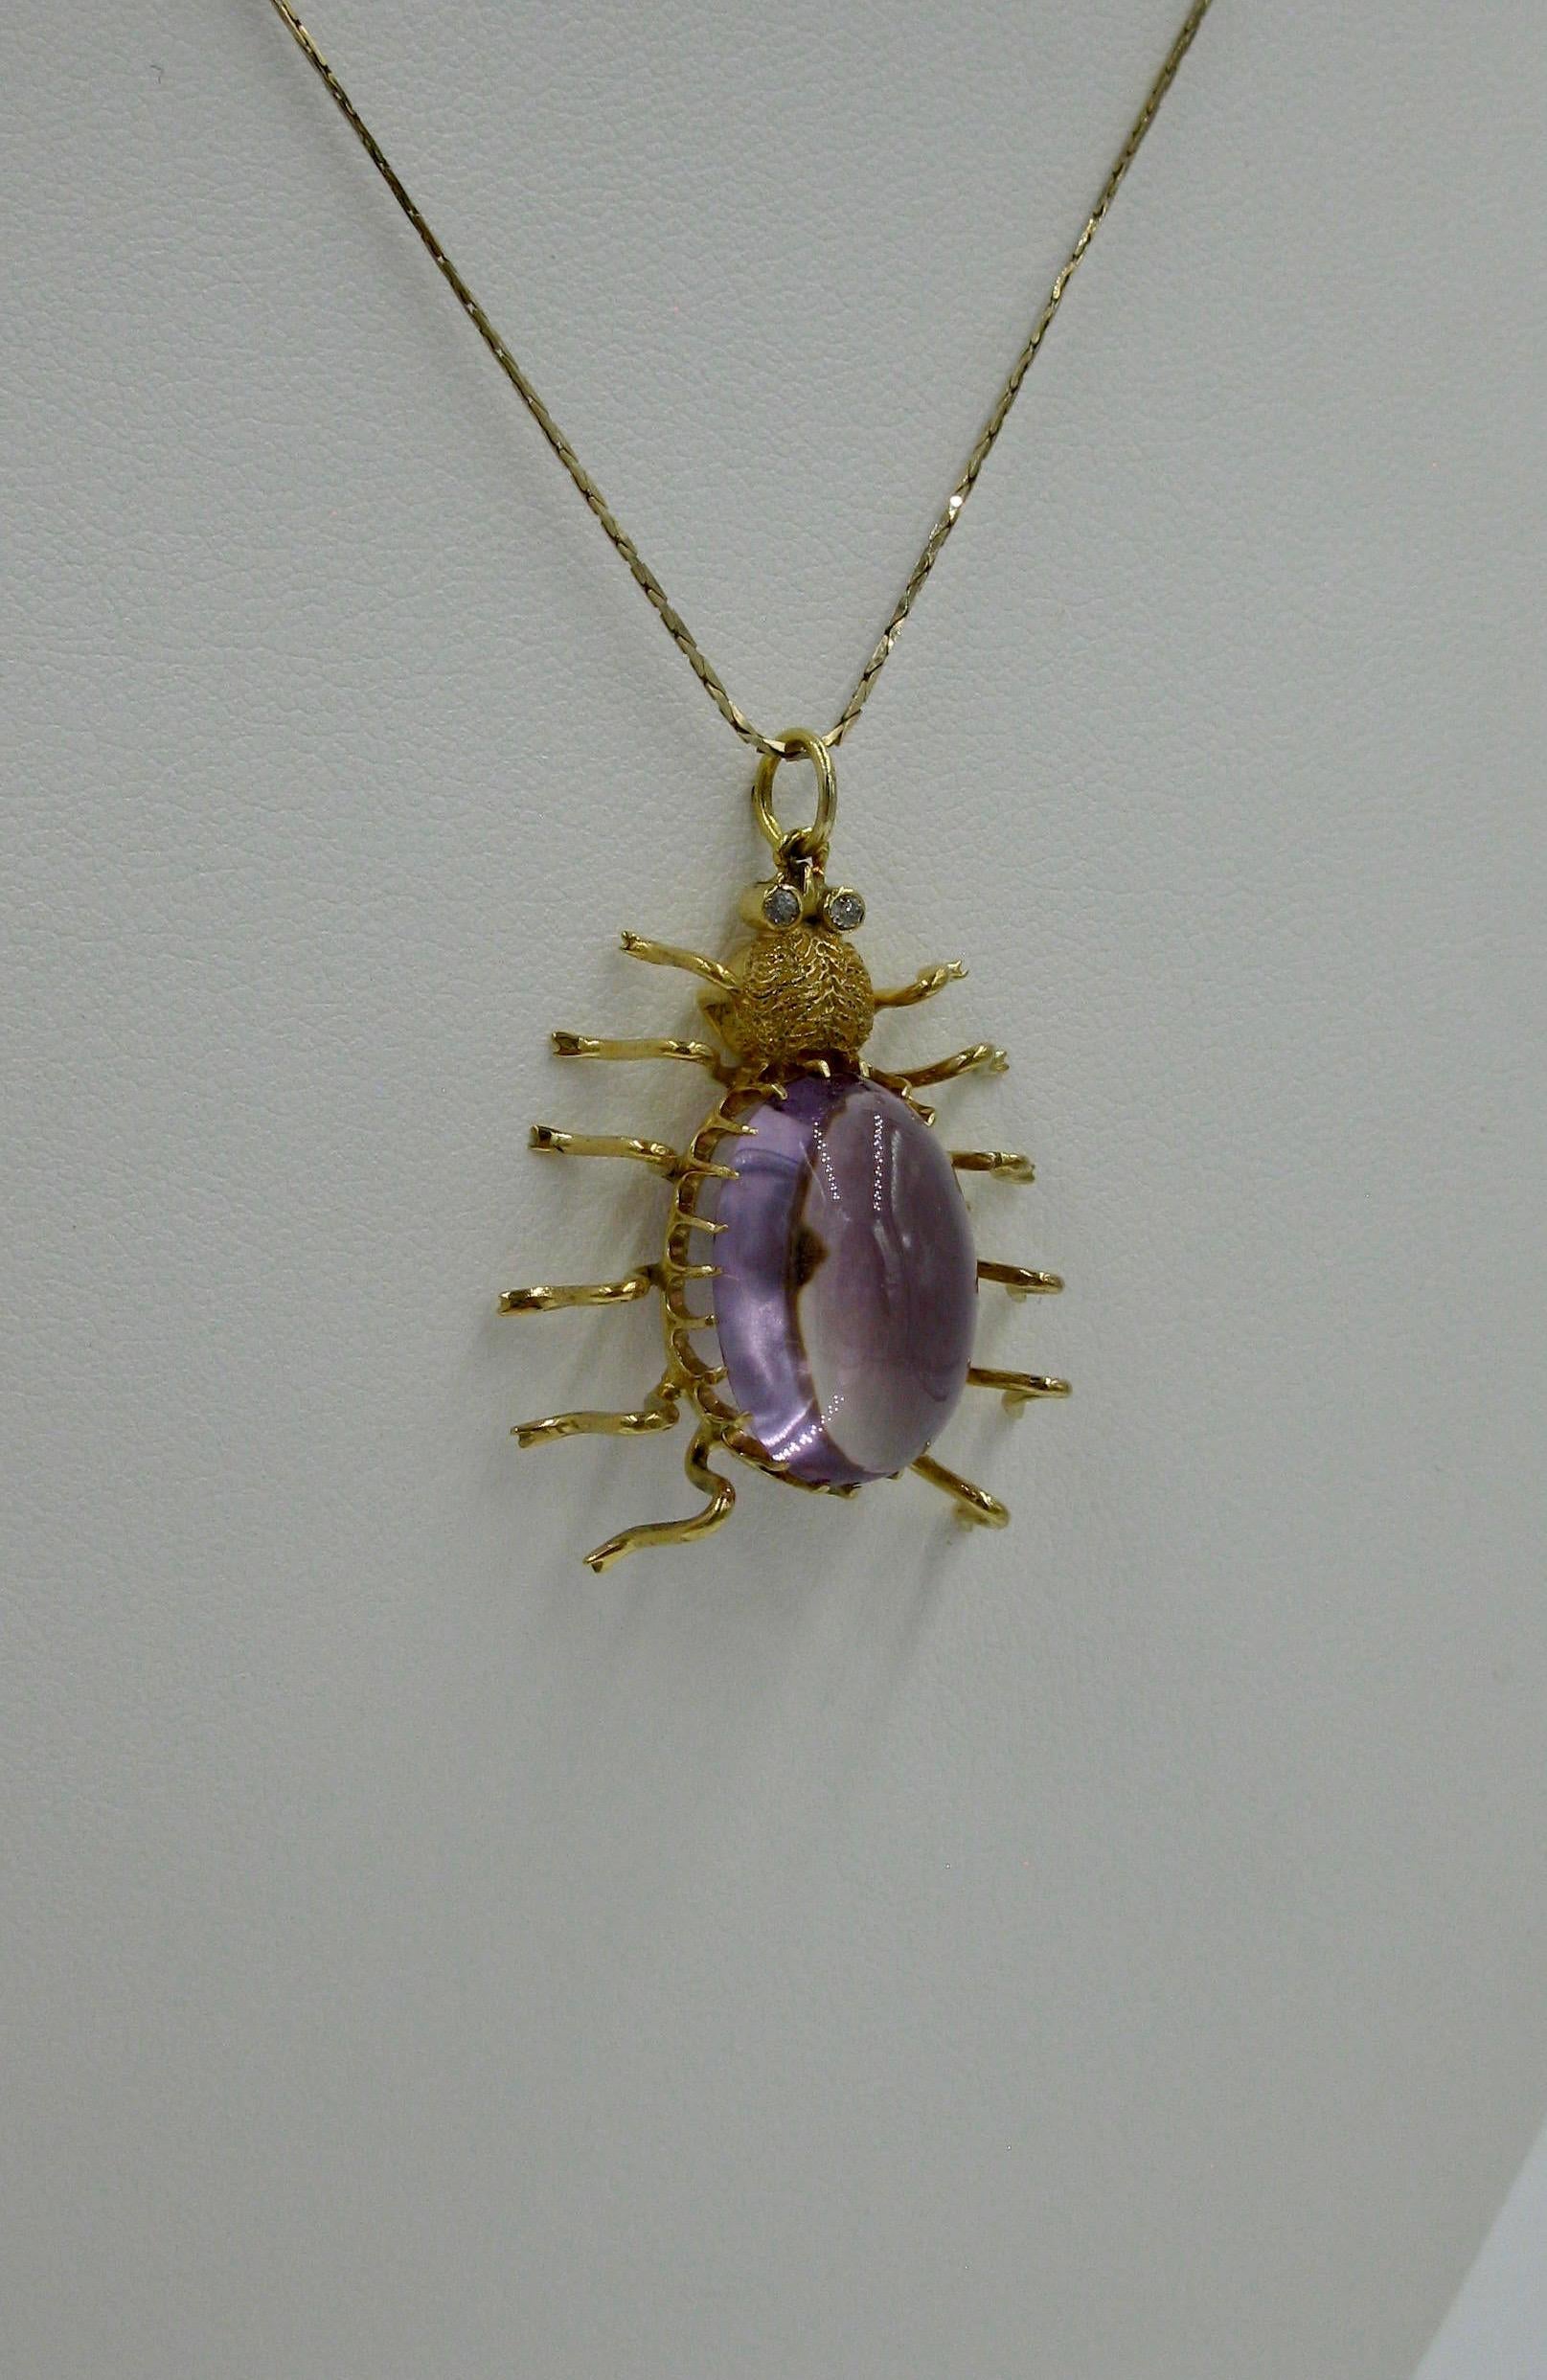 Antique 10 Carat Amethyst Diamond Spider Insect Pendant Necklace Vintage Gold For Sale 2